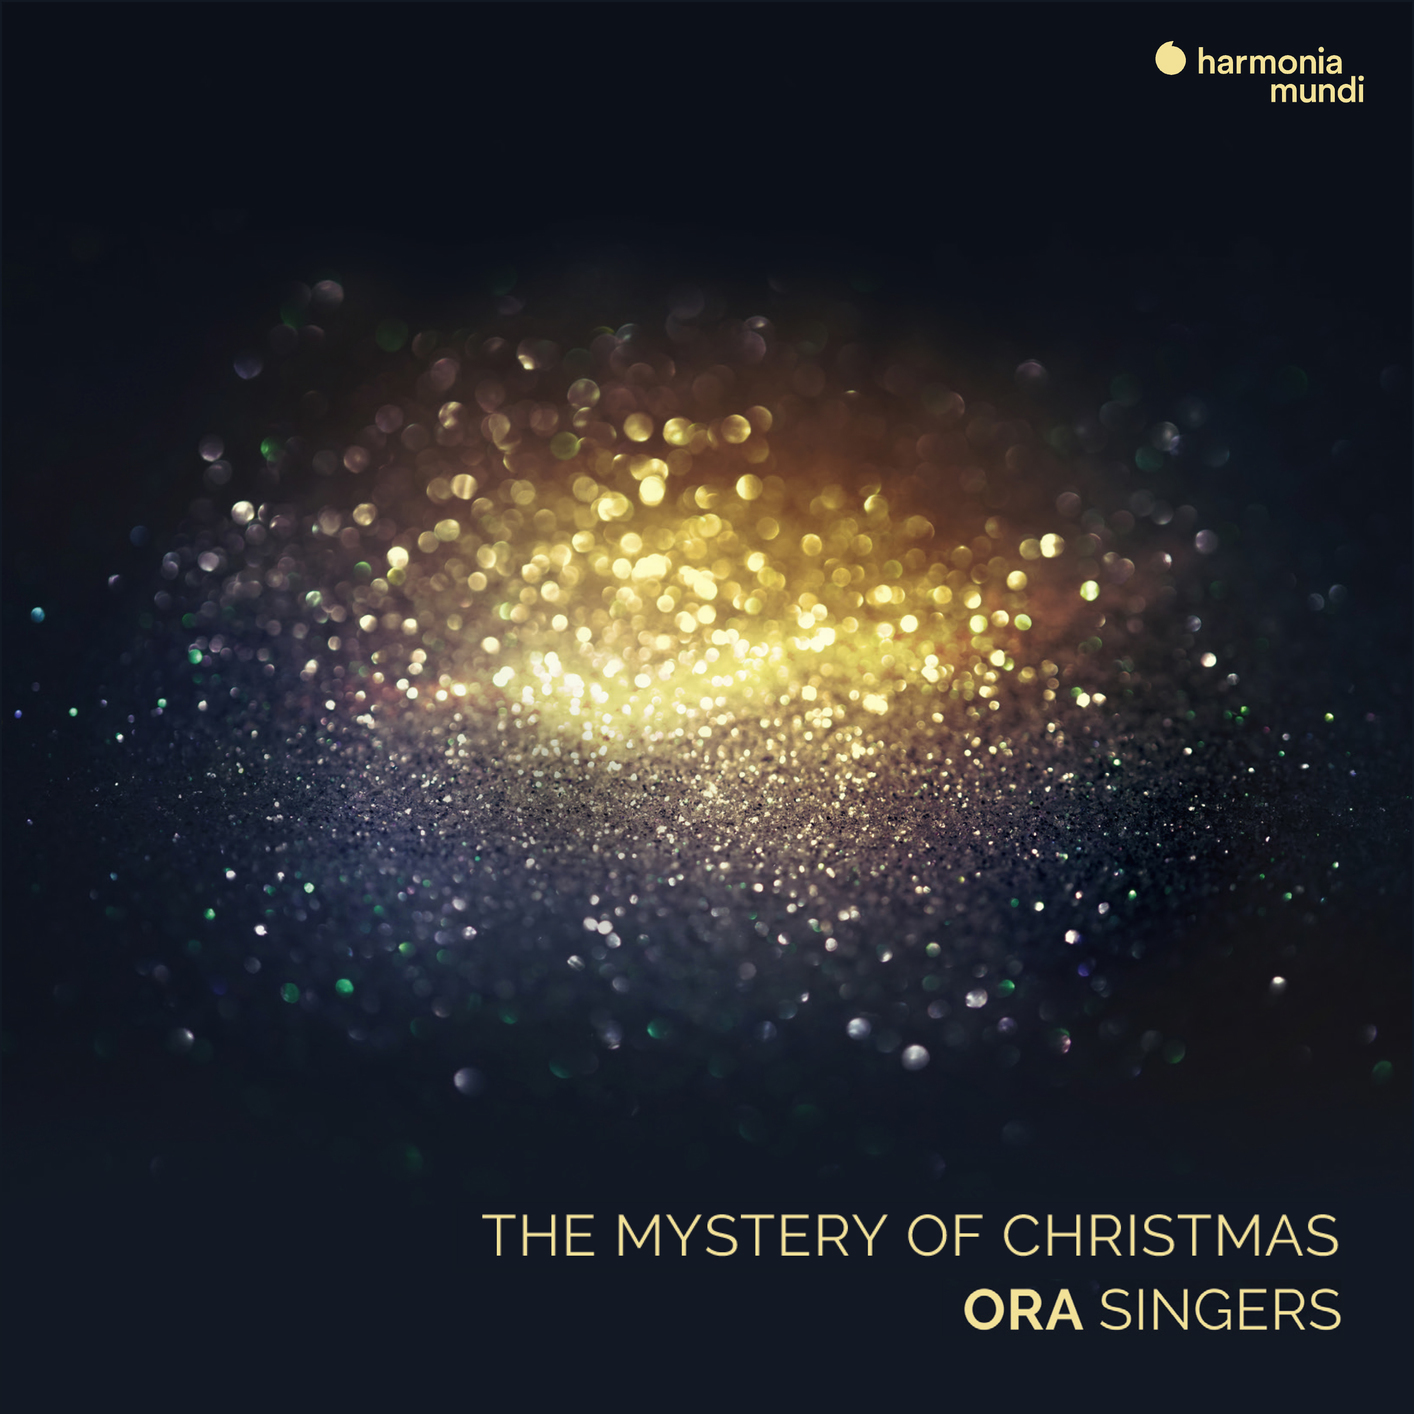 Suzi Digby and Ora Singers - The Mystery of Christmas (2018) [FLAC 24bit/96kHz]